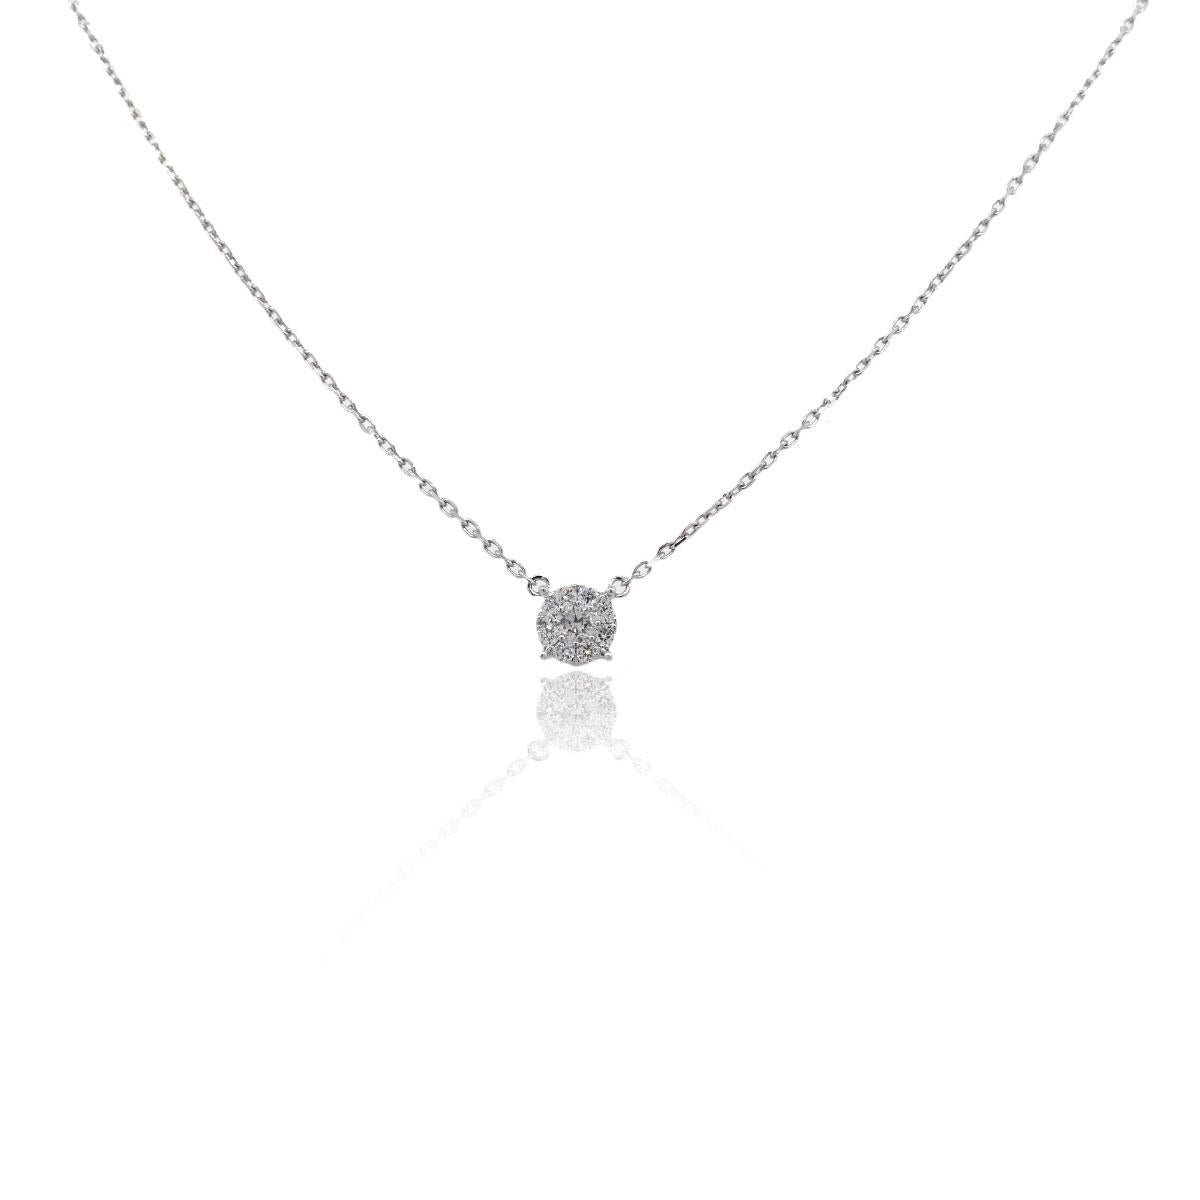 Material: 18k white gold
Diamond Details: Approx. 0.29ctw of round cut diamonds. Diamonds are G/H in color and SI in clarity.
Necklace Measurements: 16″
Pendant Measurements: 5.47mm x 5.70mm
Clasp: Lobster clasp
Total Weight: 3.2g (2dwt)
SKU: G8531